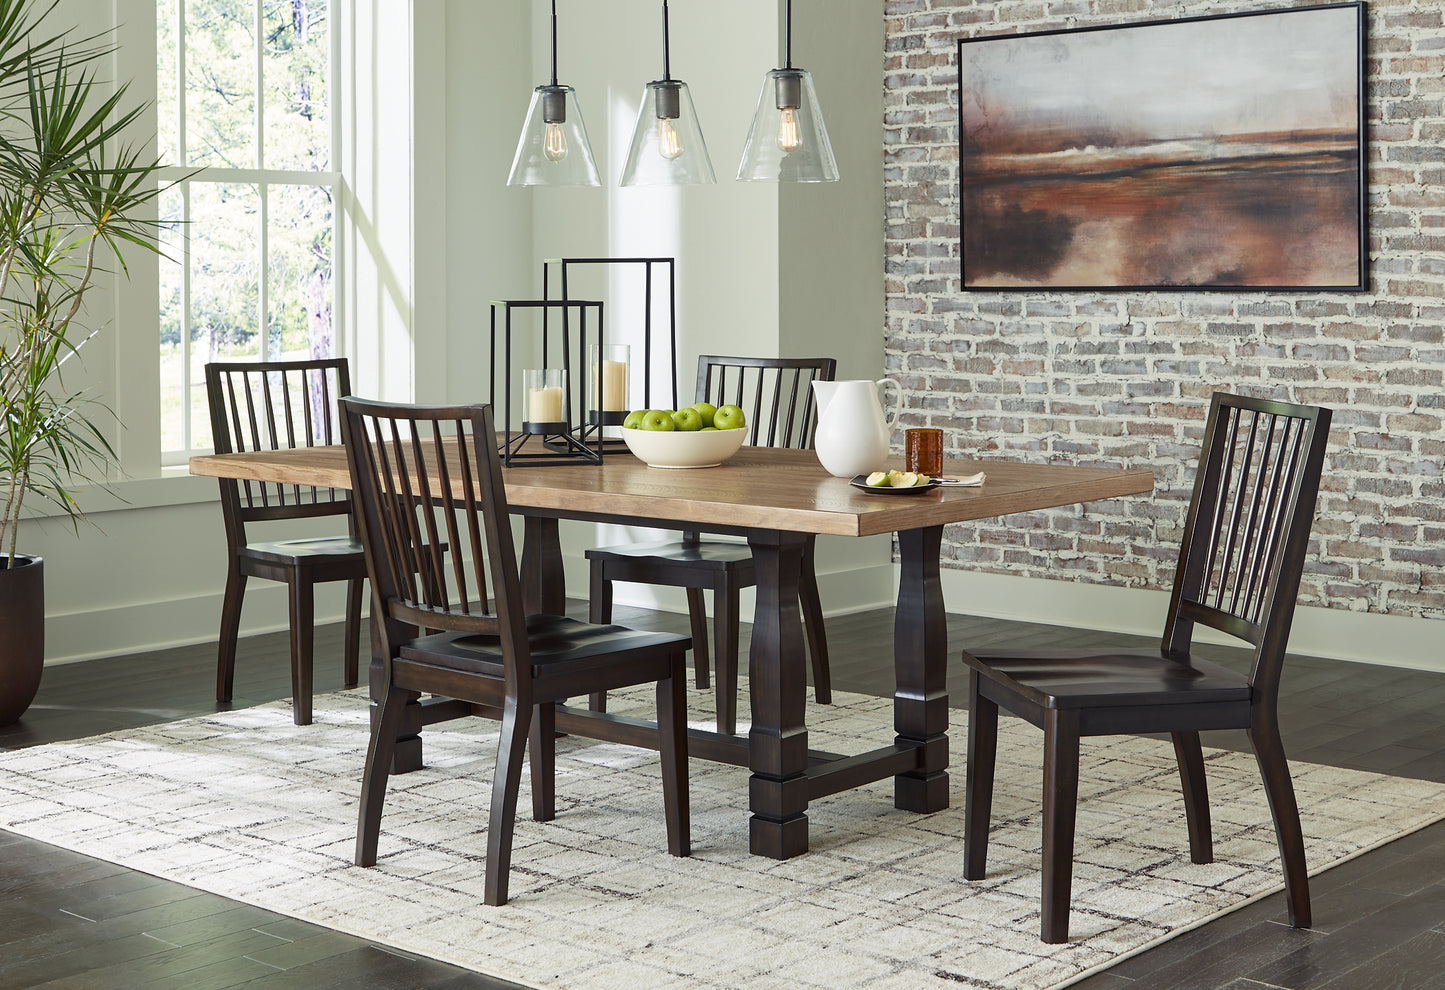 Charterton Dining Table and 4 Chairs Signature Design by Ashley®